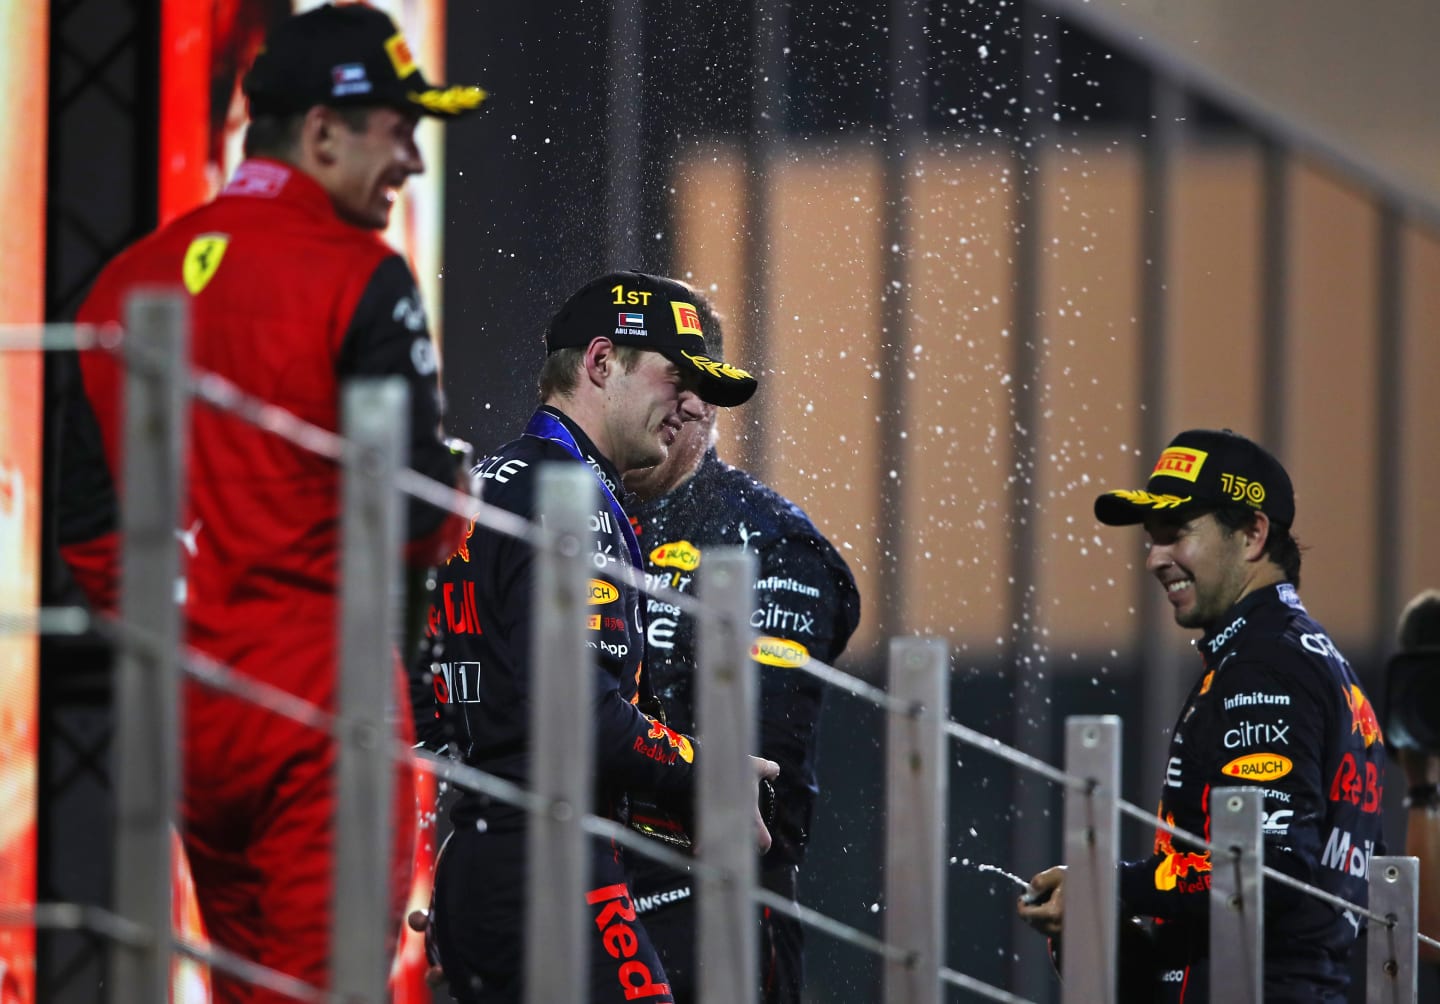 ABU DHABI, UNITED ARAB EMIRATES - NOVEMBER 20: Race winner Max Verstappen of the Netherlands and Oracle Red Bull Racing, Second placed Charles Leclerc of Monaco and Ferrari and Third placed Sergio Perez of Mexico and Oracle Red Bull Racing celebrate on the podium during the F1 Grand Prix of Abu Dhabi at Yas Marina Circuit on November 20, 2022 in Abu Dhabi, United Arab Emirates. (Photo by Joe Portlock - Formula 1/Formula 1 via Getty Images)